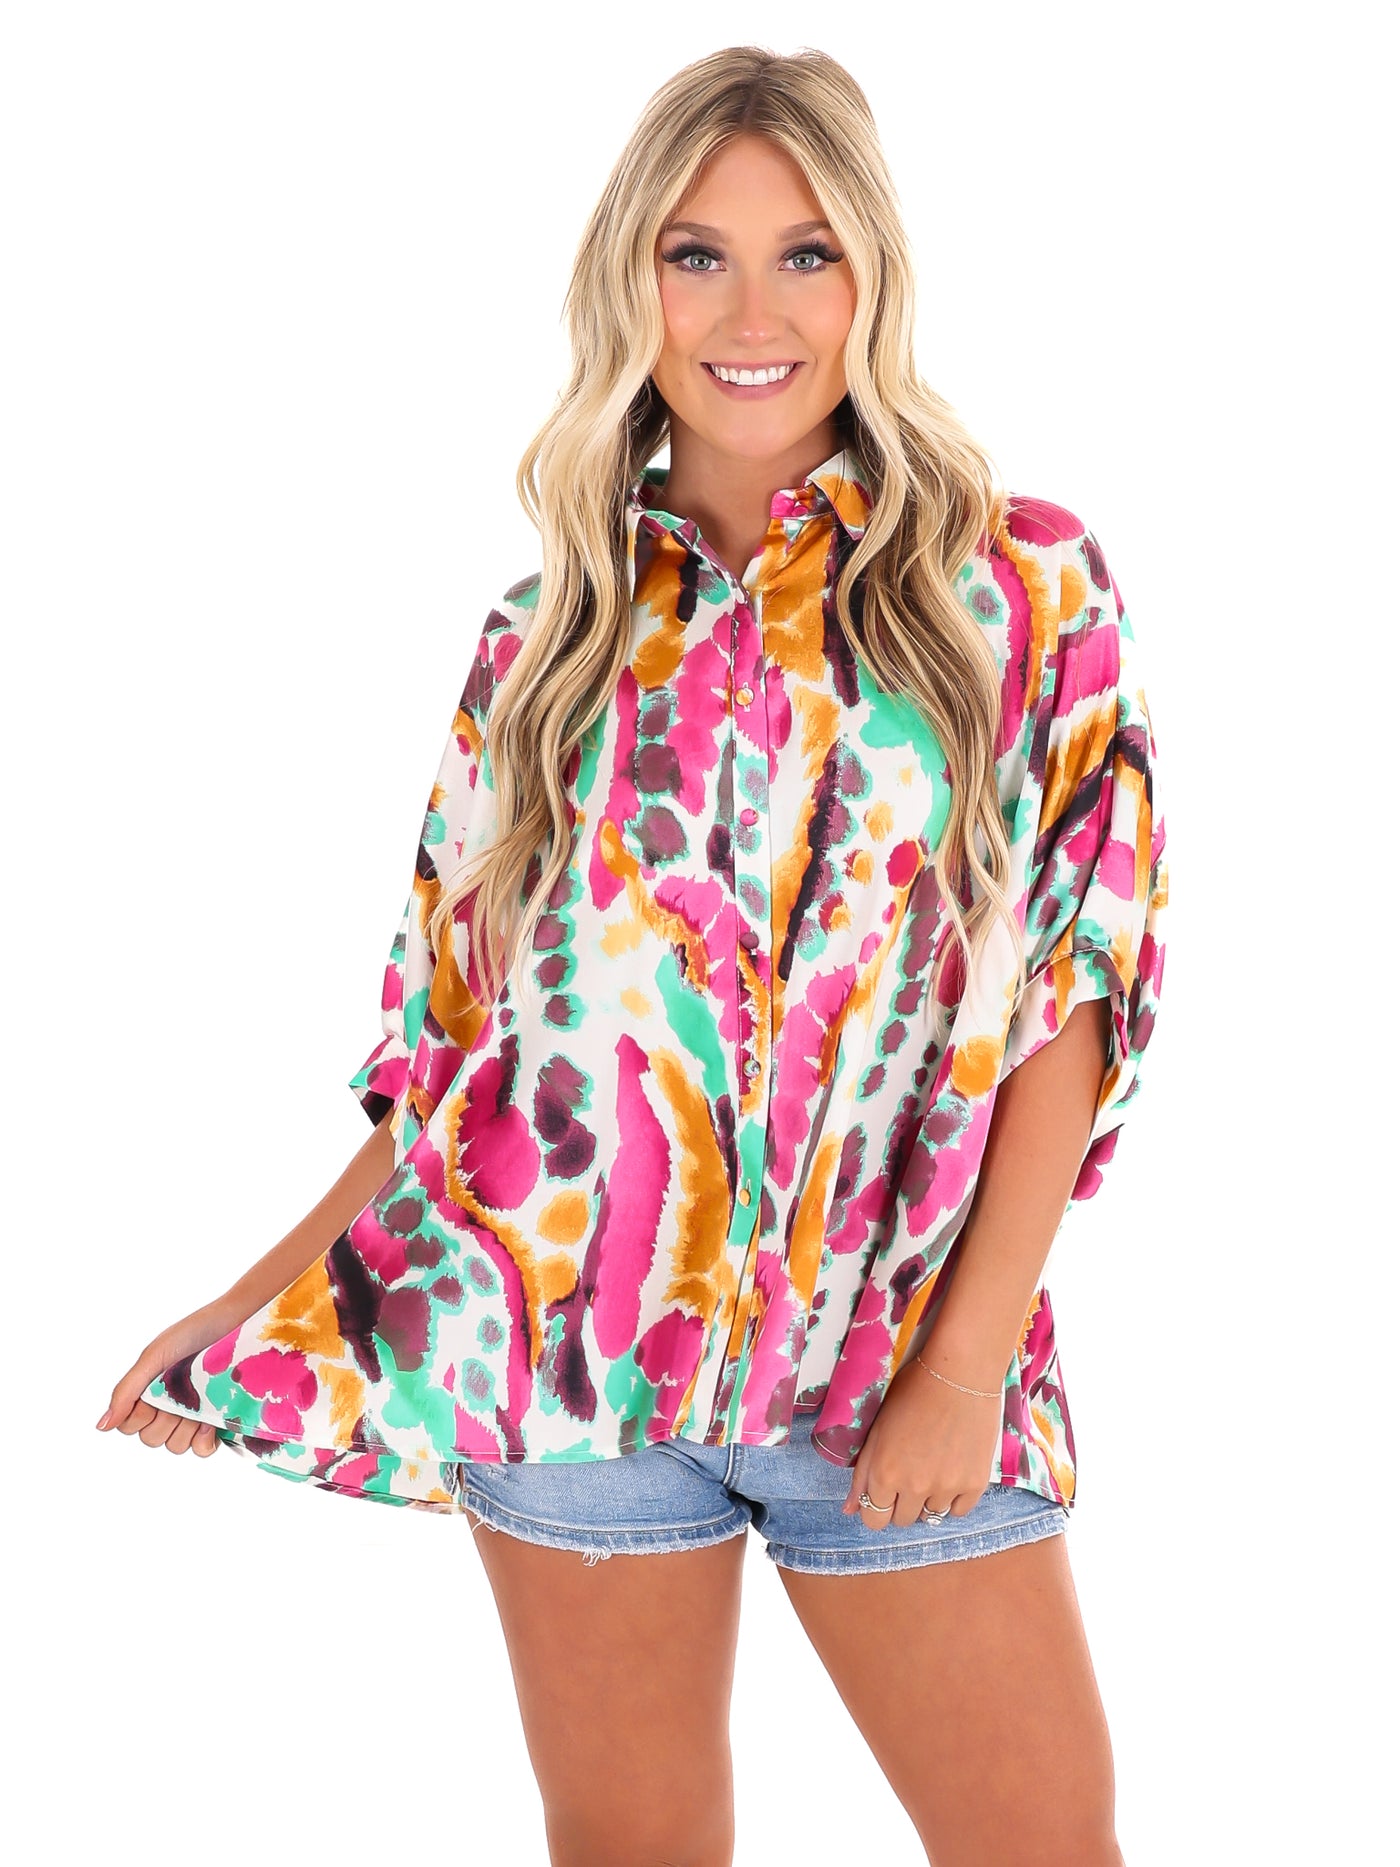 Anything is Possible Tie Dye Top